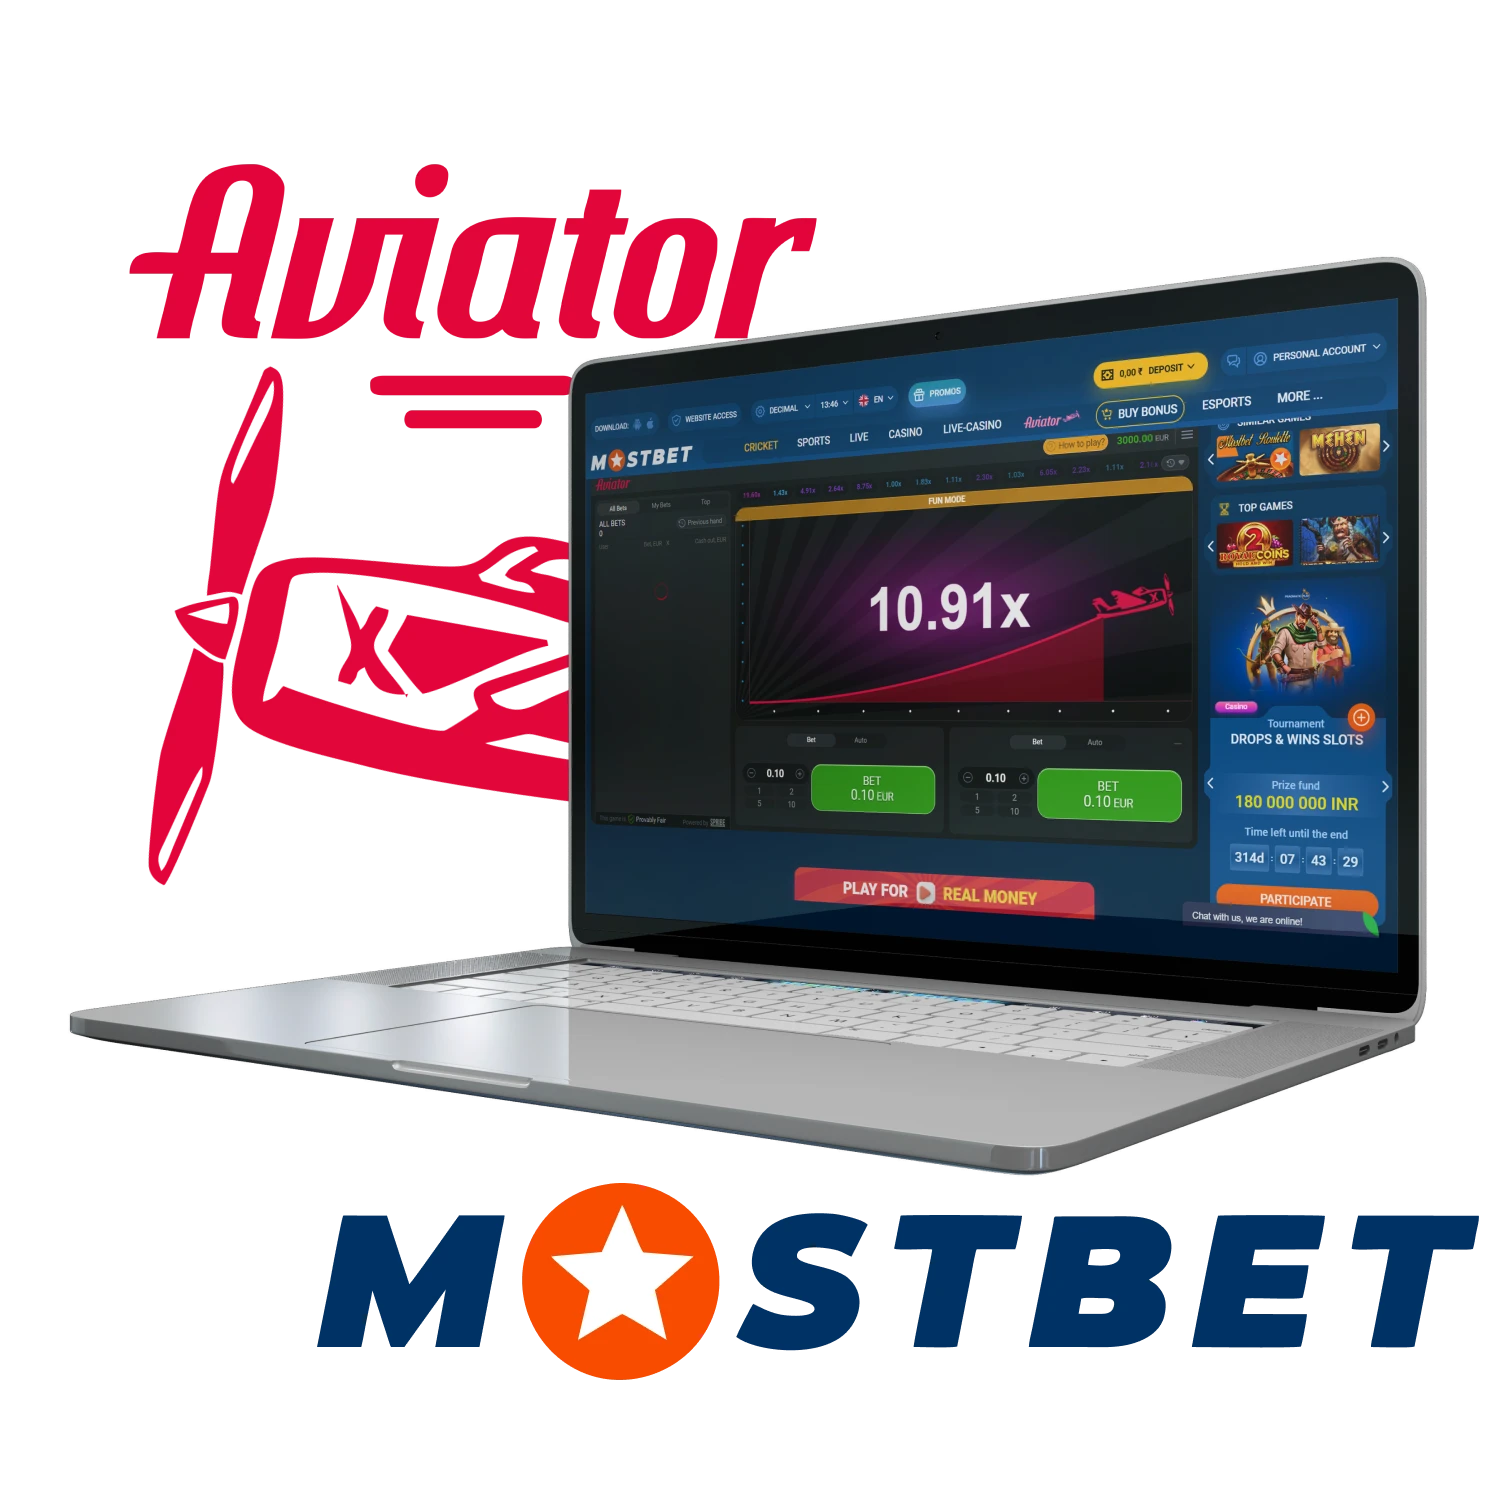 Super Easy Simple Ways The Pros Use To Promote Mostbet Sports Betting Company and Casino in India